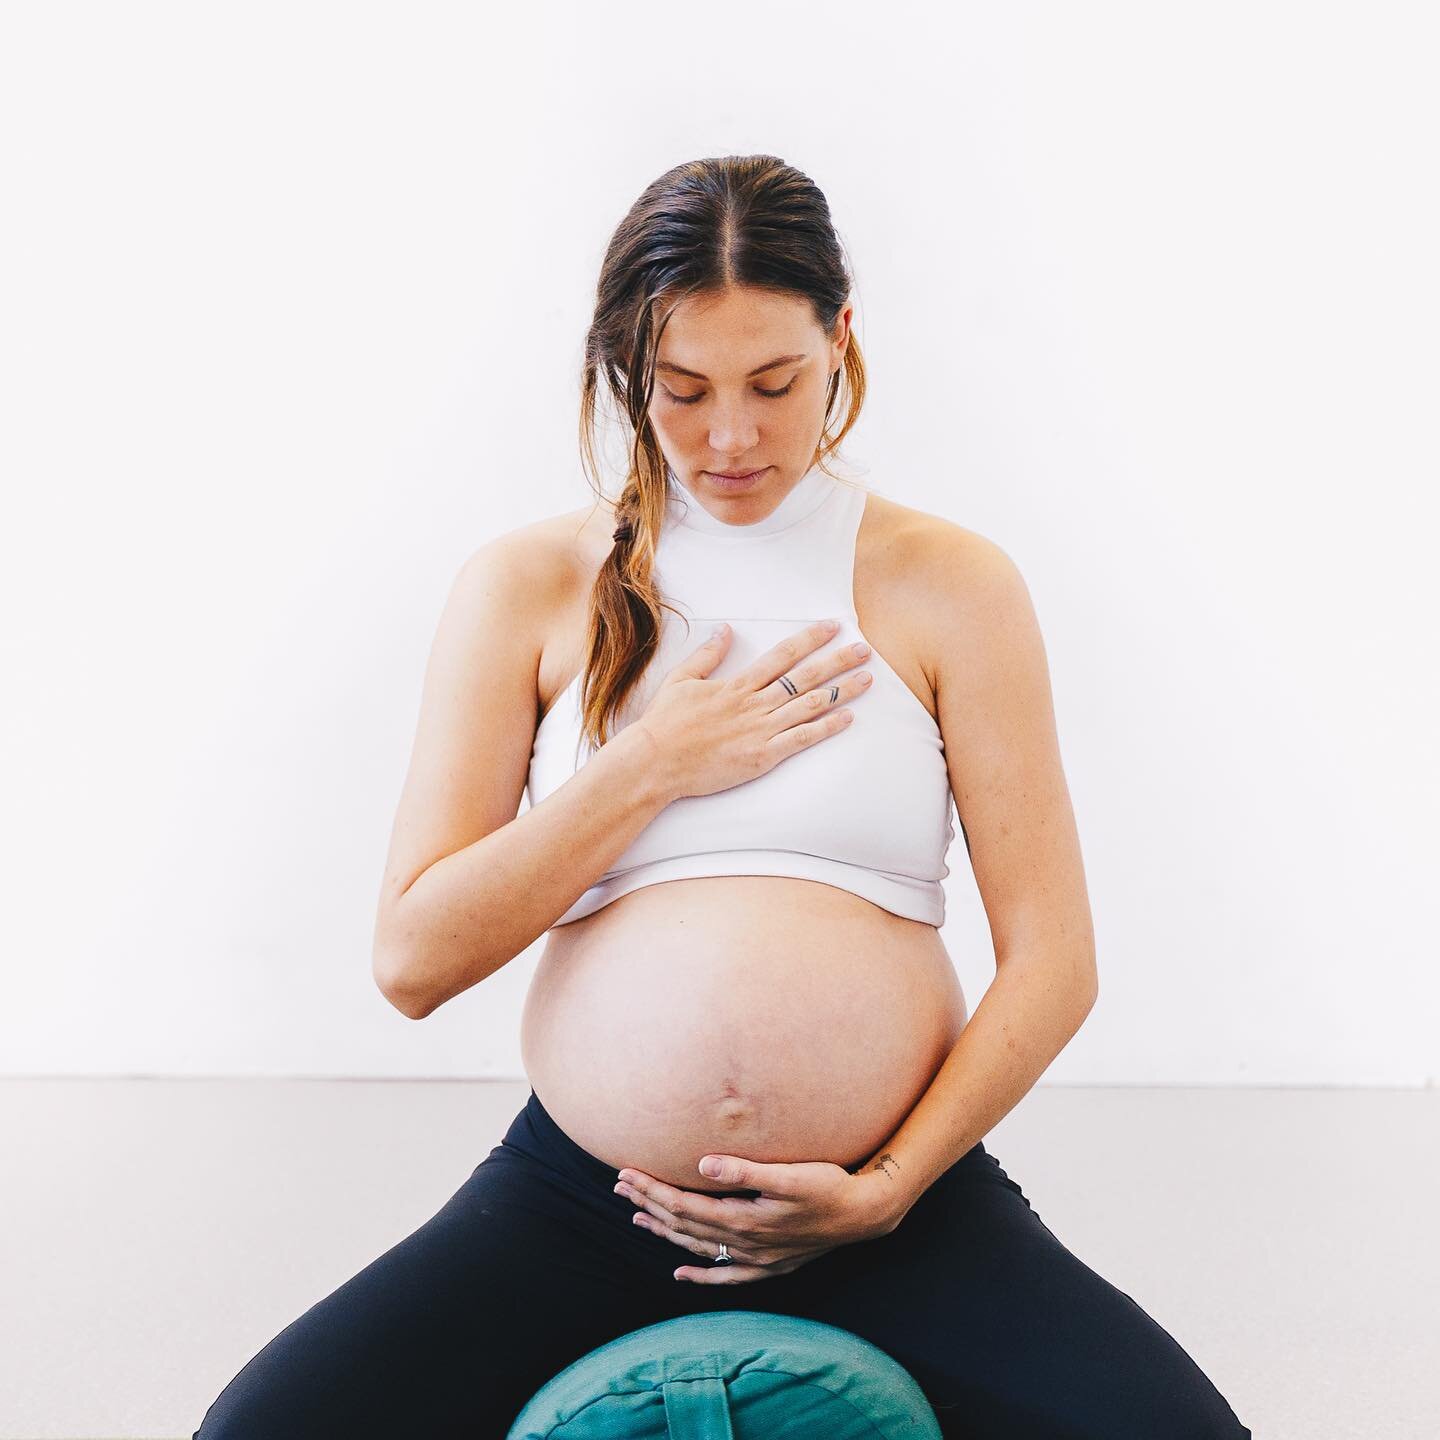 Only a few more PreNatal sessions left on our studios. Join Ruth &amp; Pru from 5.45pm for deep connection &amp; endless pregnancy education
.
🌱 Timetable Online ~ LINK IN BIO
.
📷 @allison_marie_croft
.
.
.
.
. ⁣
.⁣
.⁣
.⁣
.⁣
.⁣
#babyboy #babygirl #